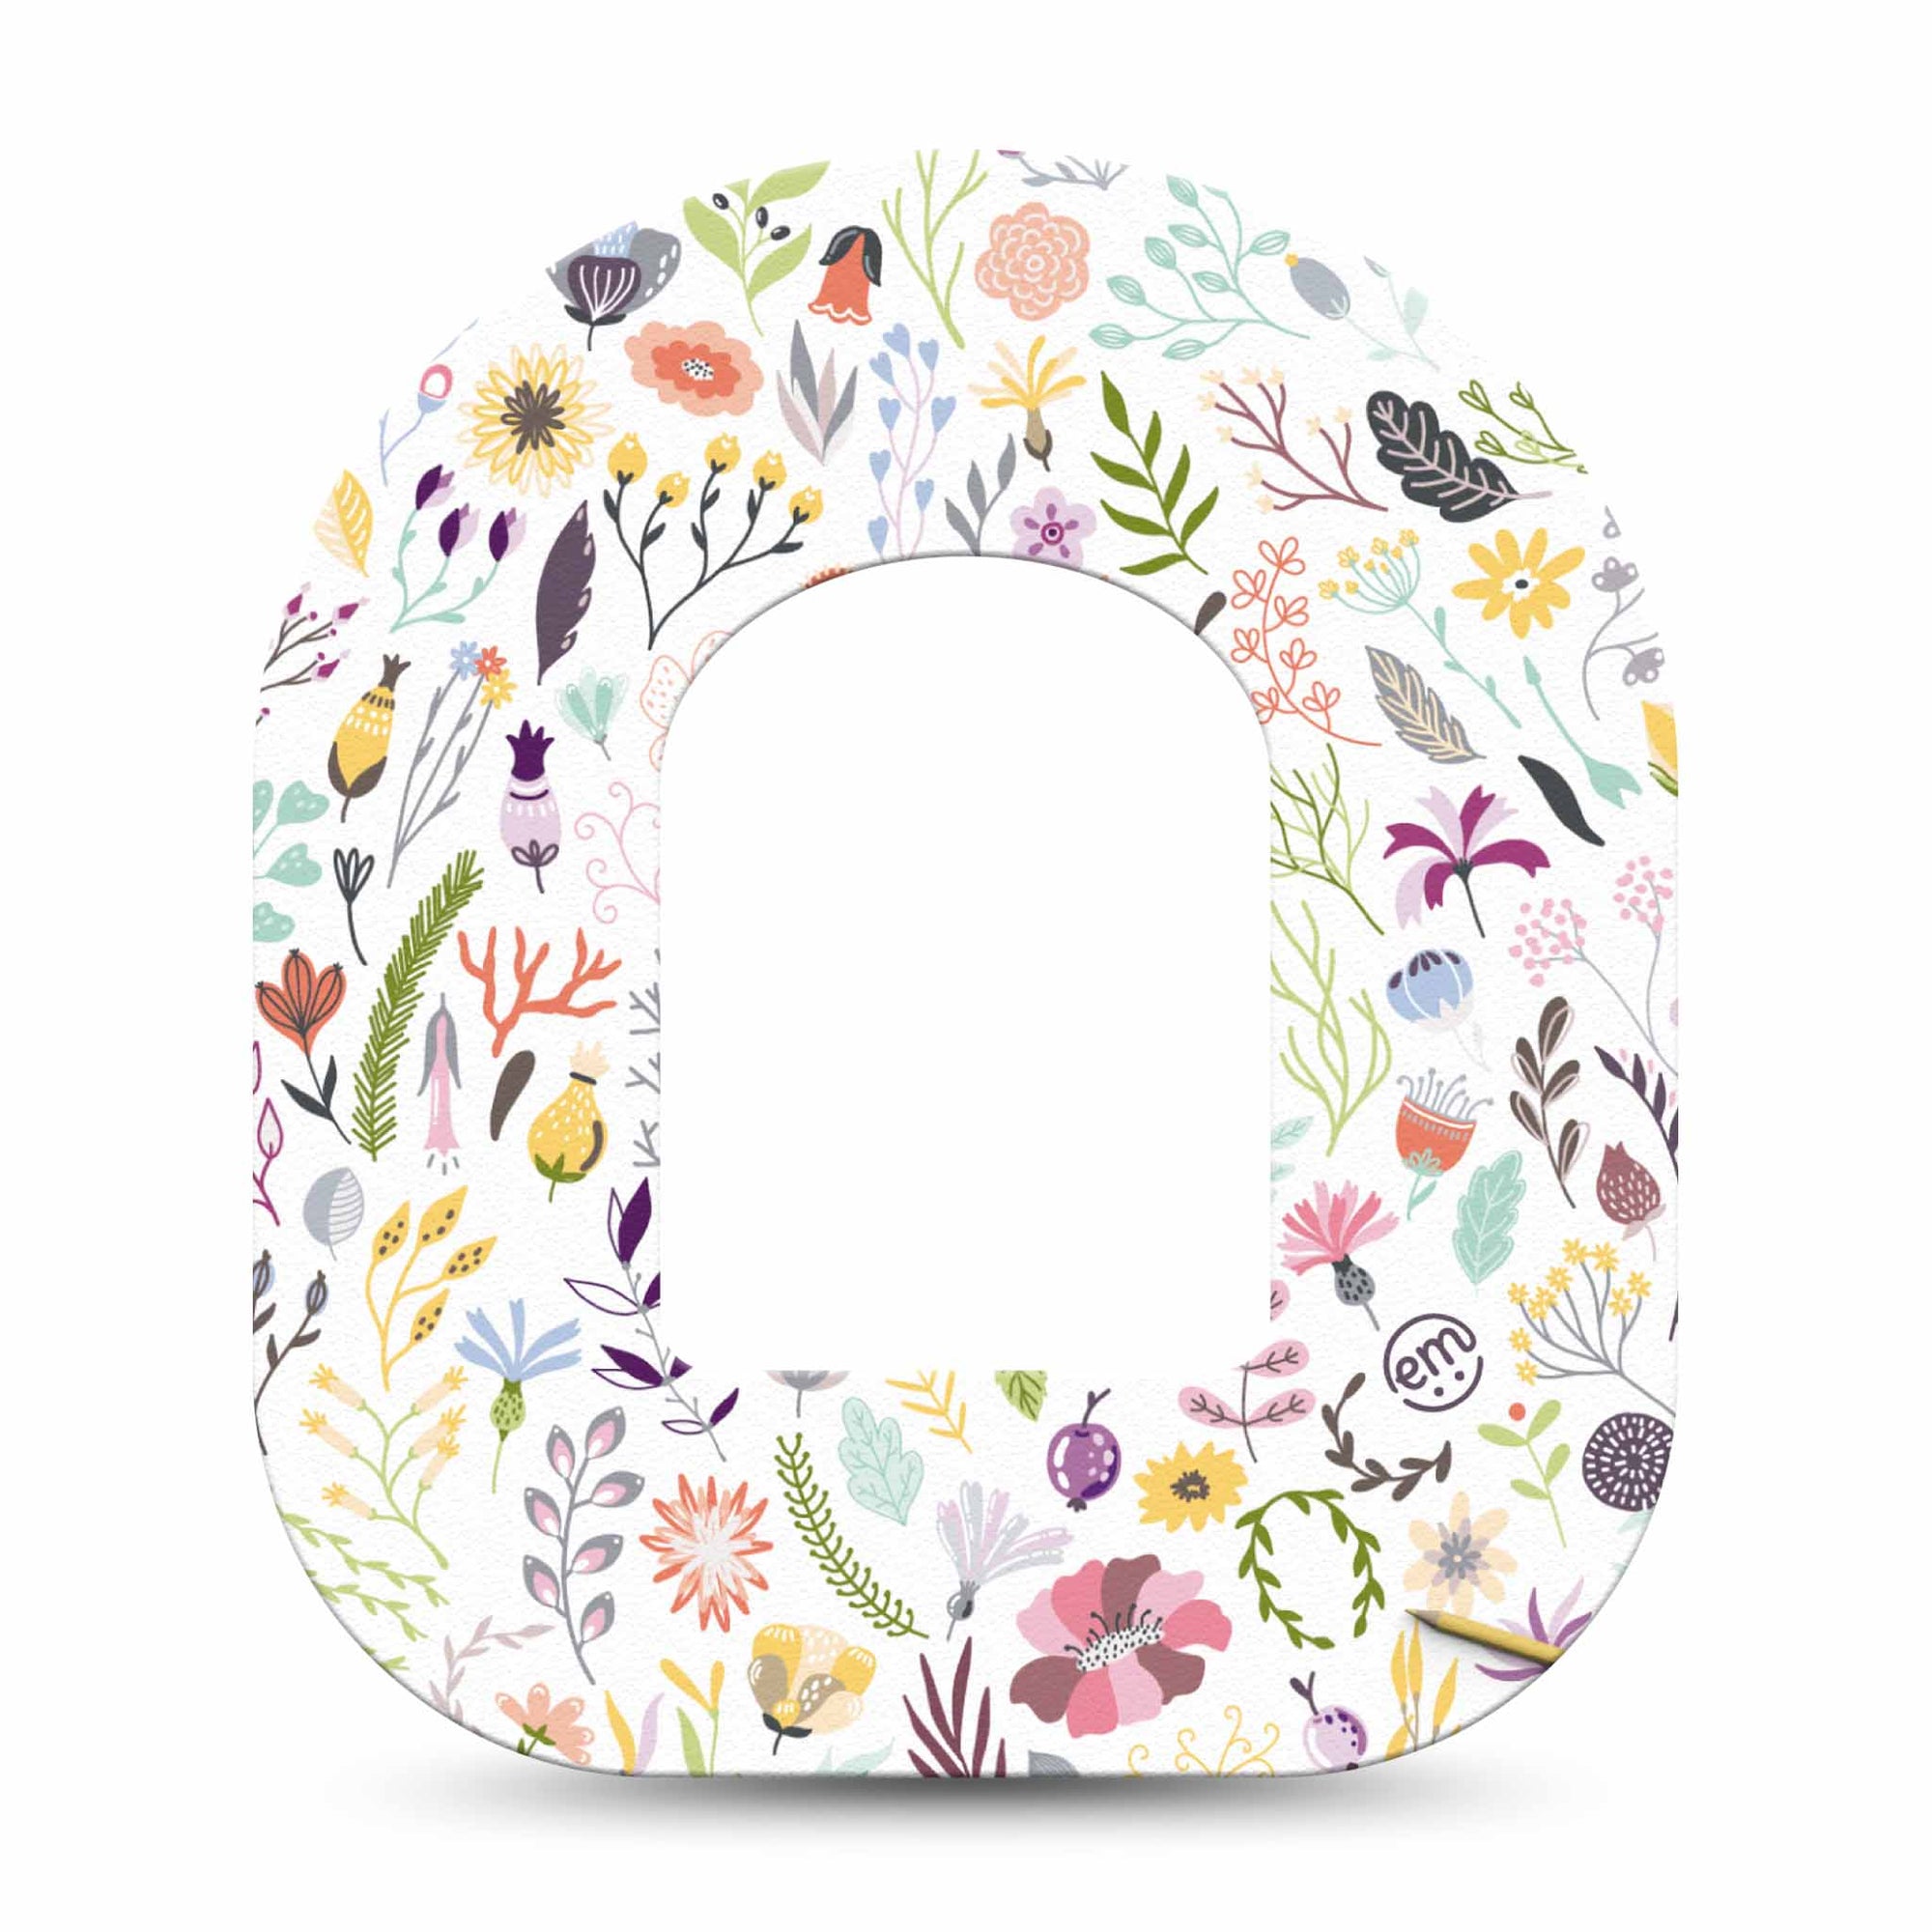 Springy Stems Pod Tape, Single, Variety of Colorful Florals and Stems Omnipod Overlay Patch Design 